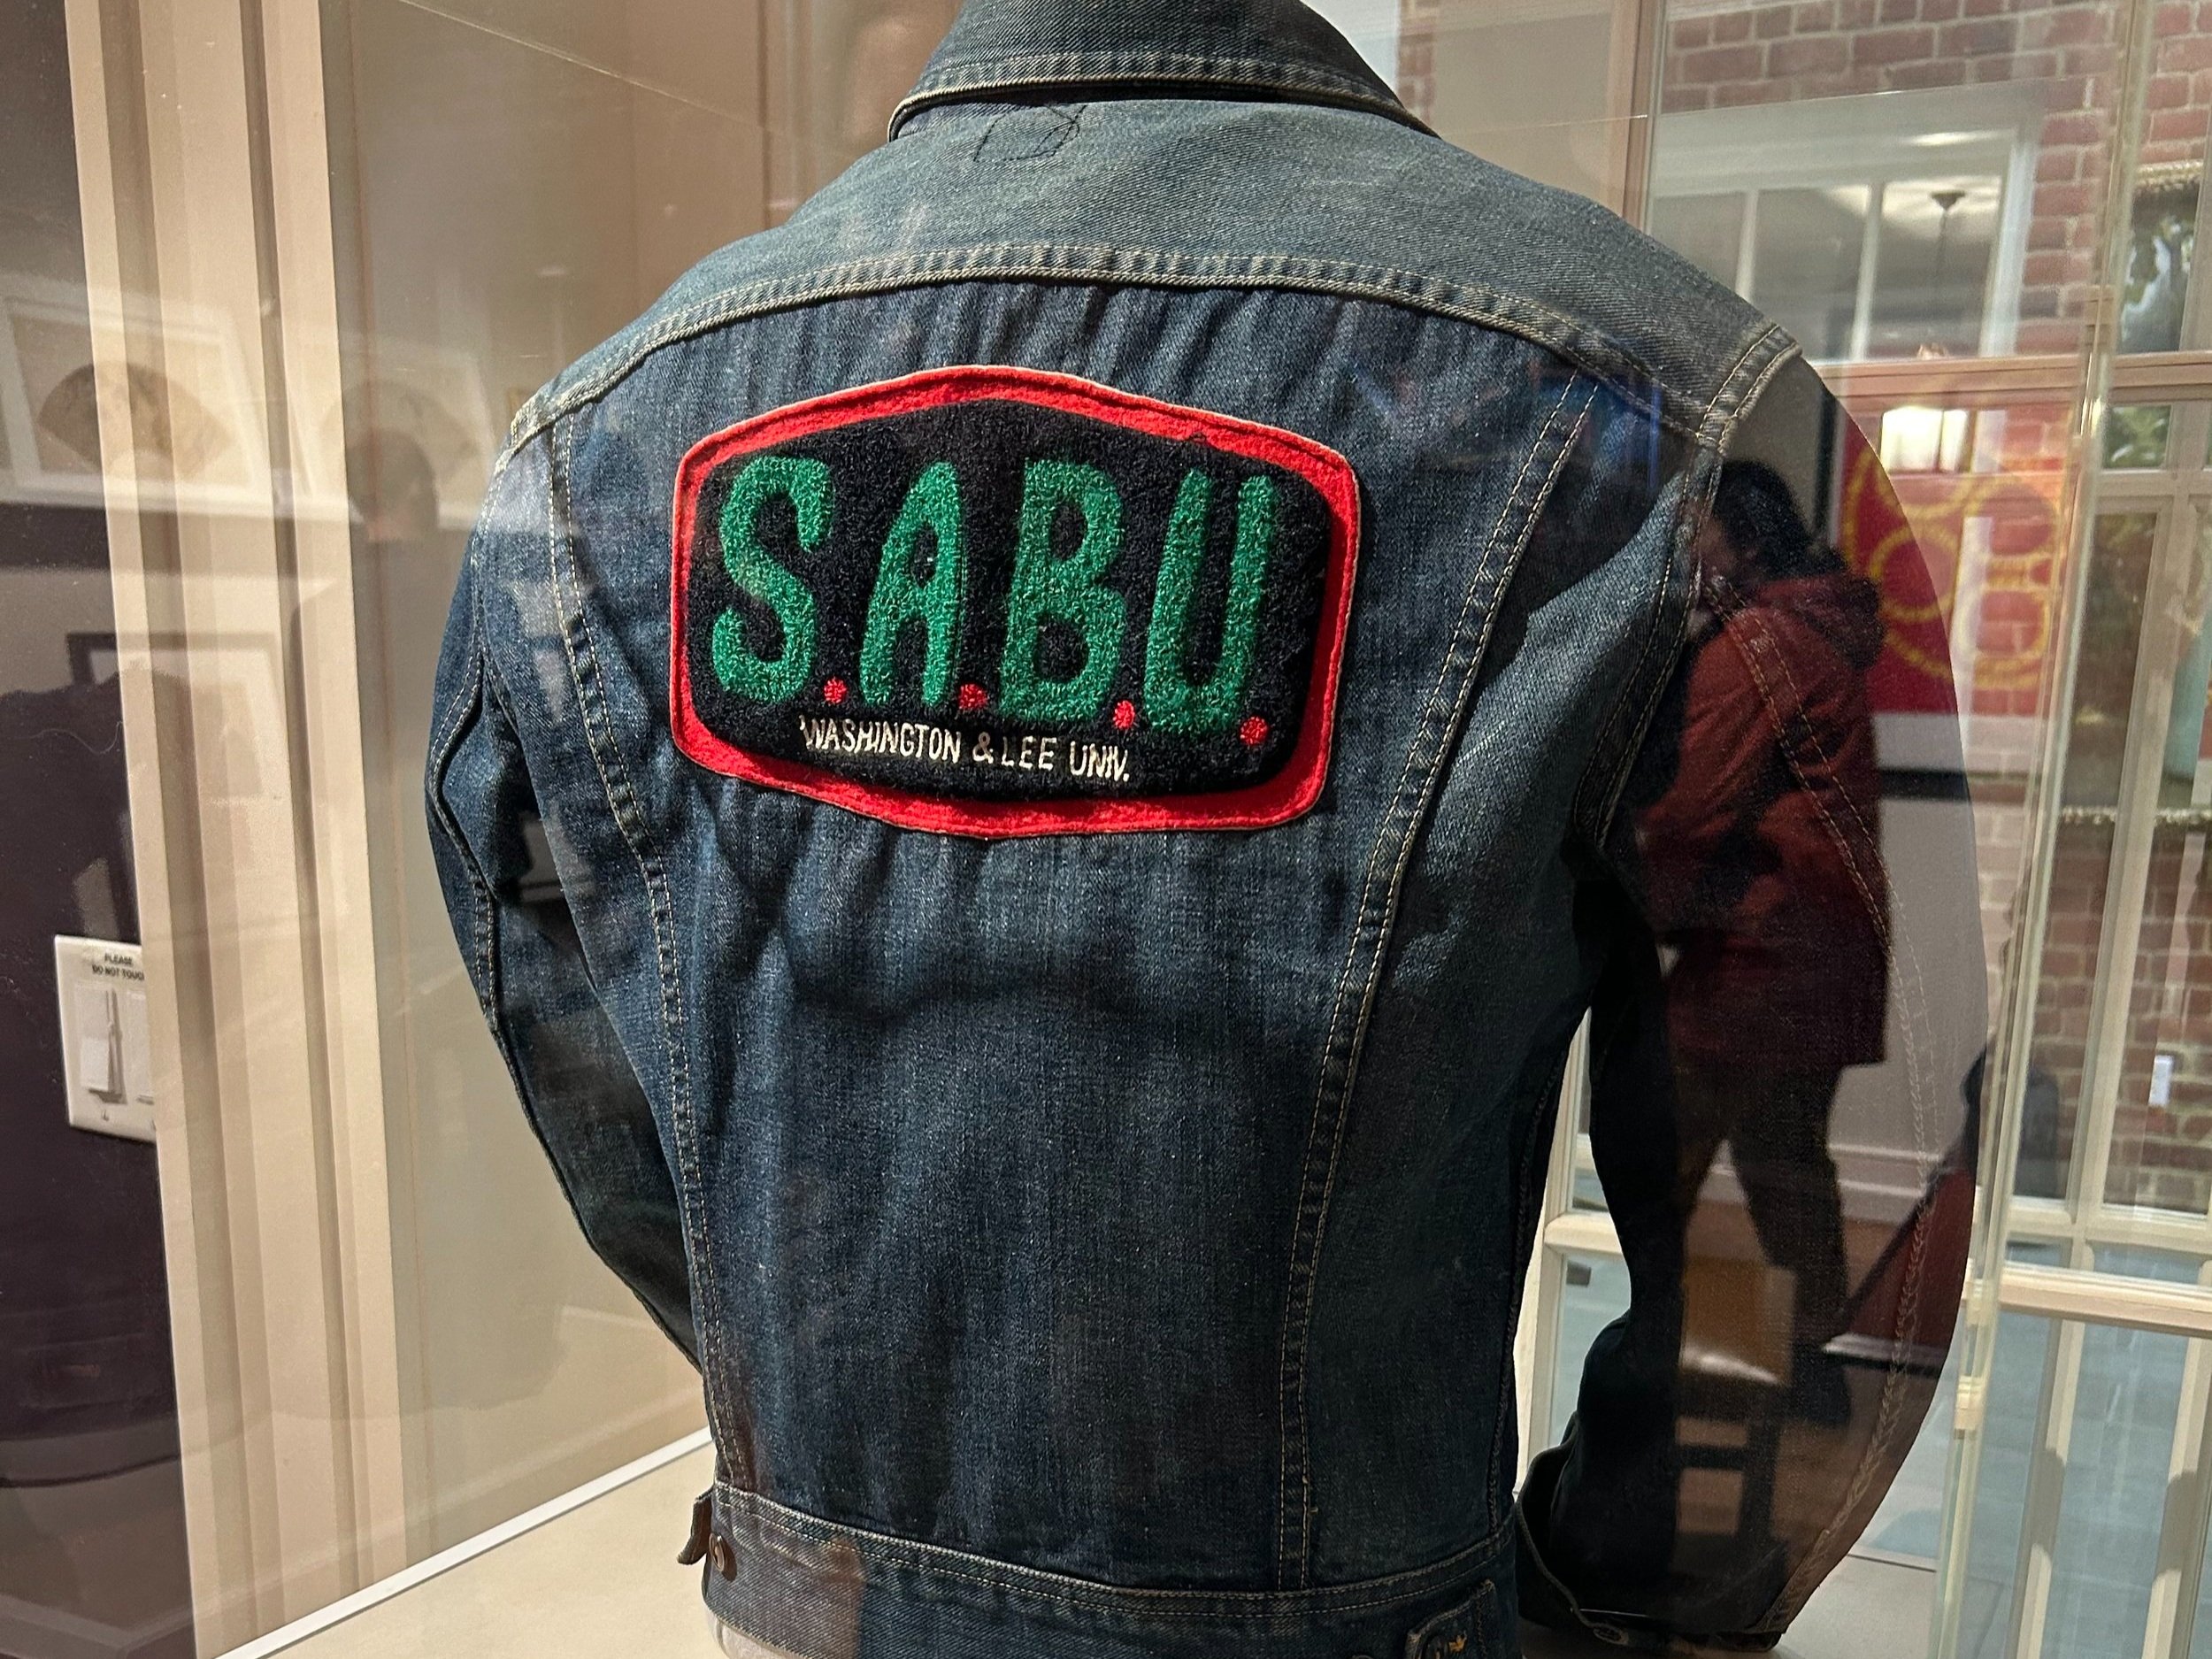  Denim SABU jacket gifted to W&amp;L Museums by John R. Hargrove, ‘76. Source:  The Spectator  